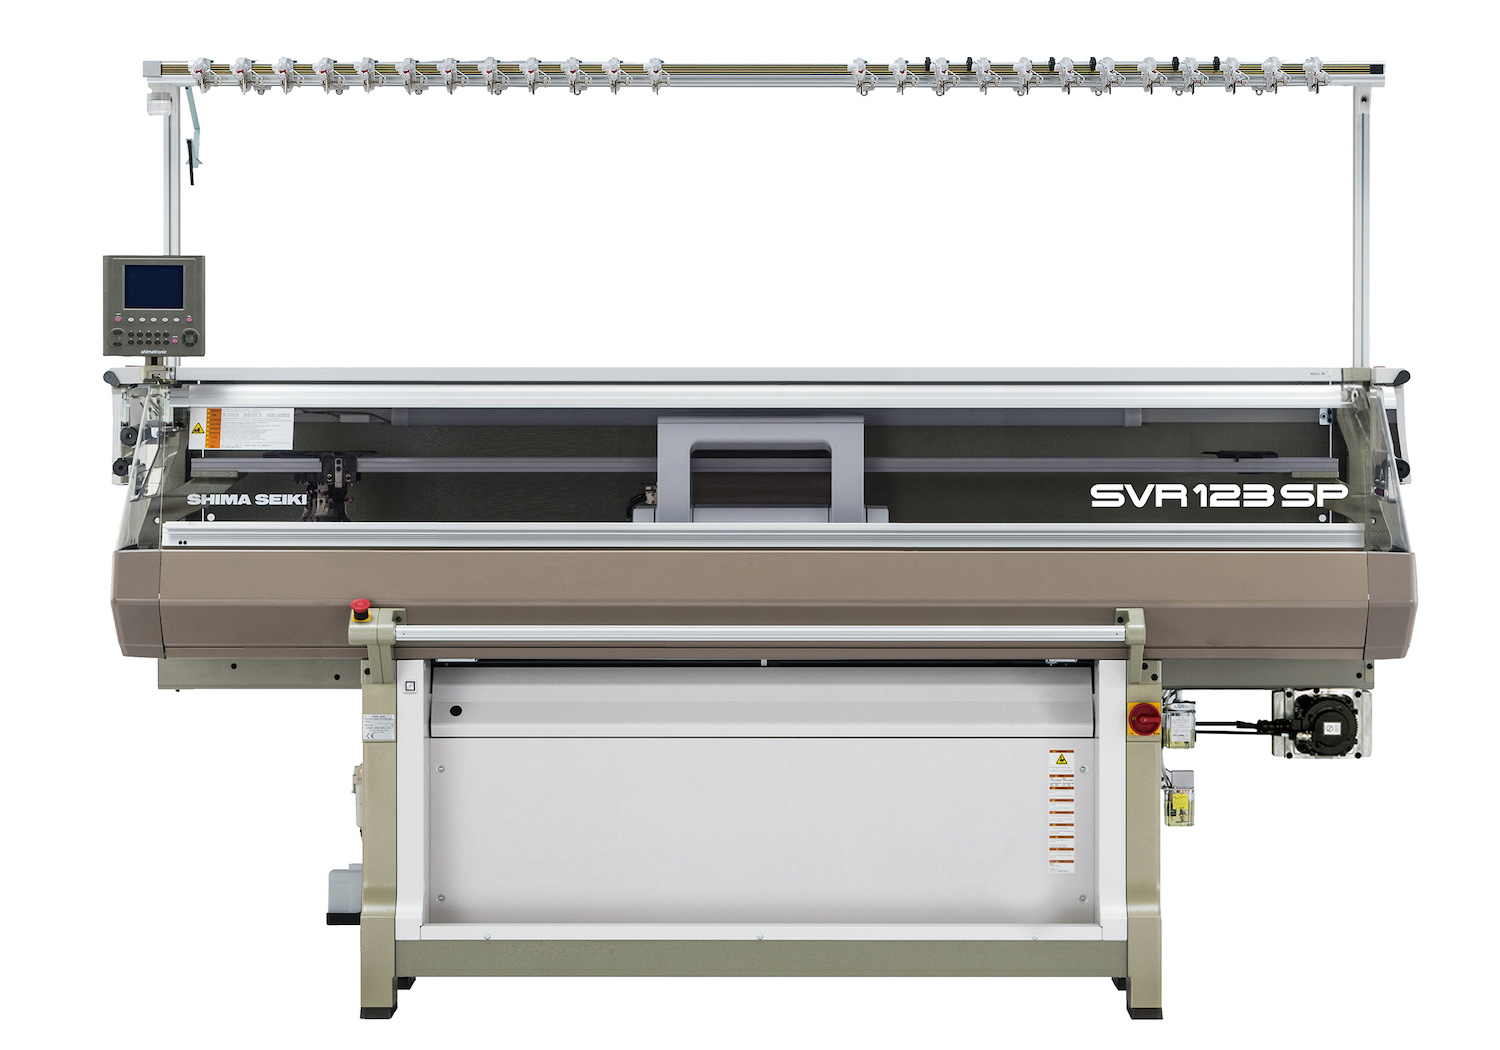 SVR123SP features i-Plating inverse-plating capability for increased patterning capability. © Shima Seiki